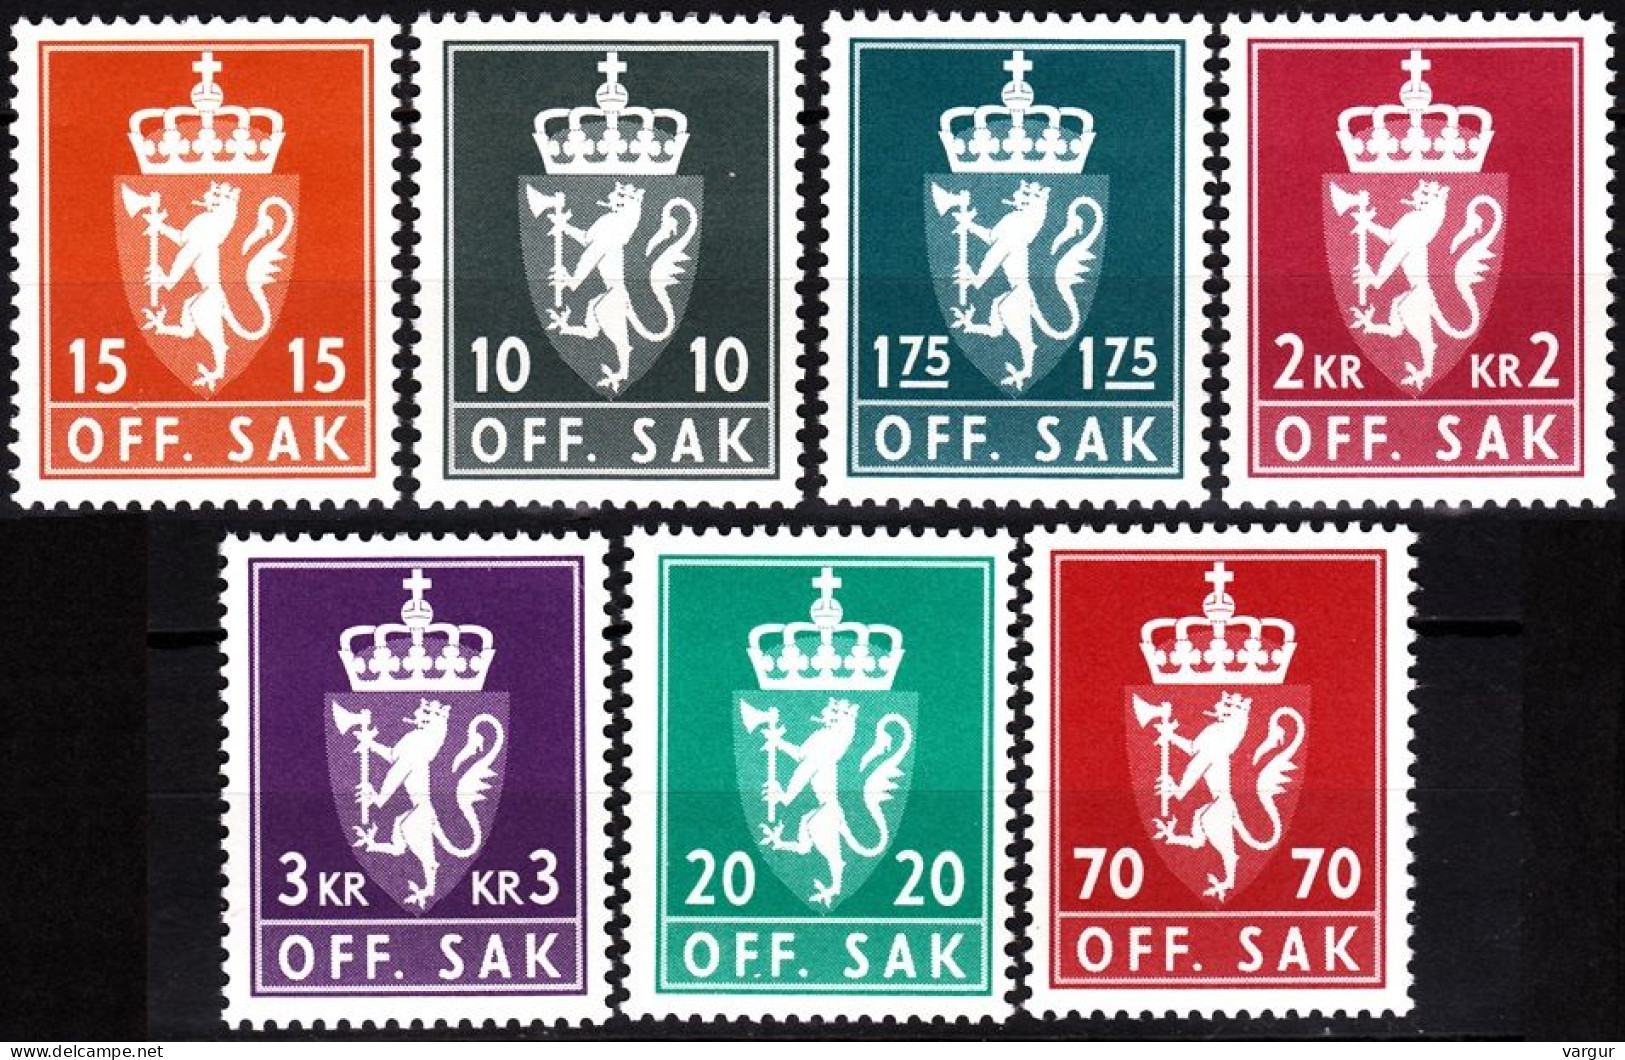 NORWAY 1981-82 Official. Heraldry. 7v, MNH - Officials